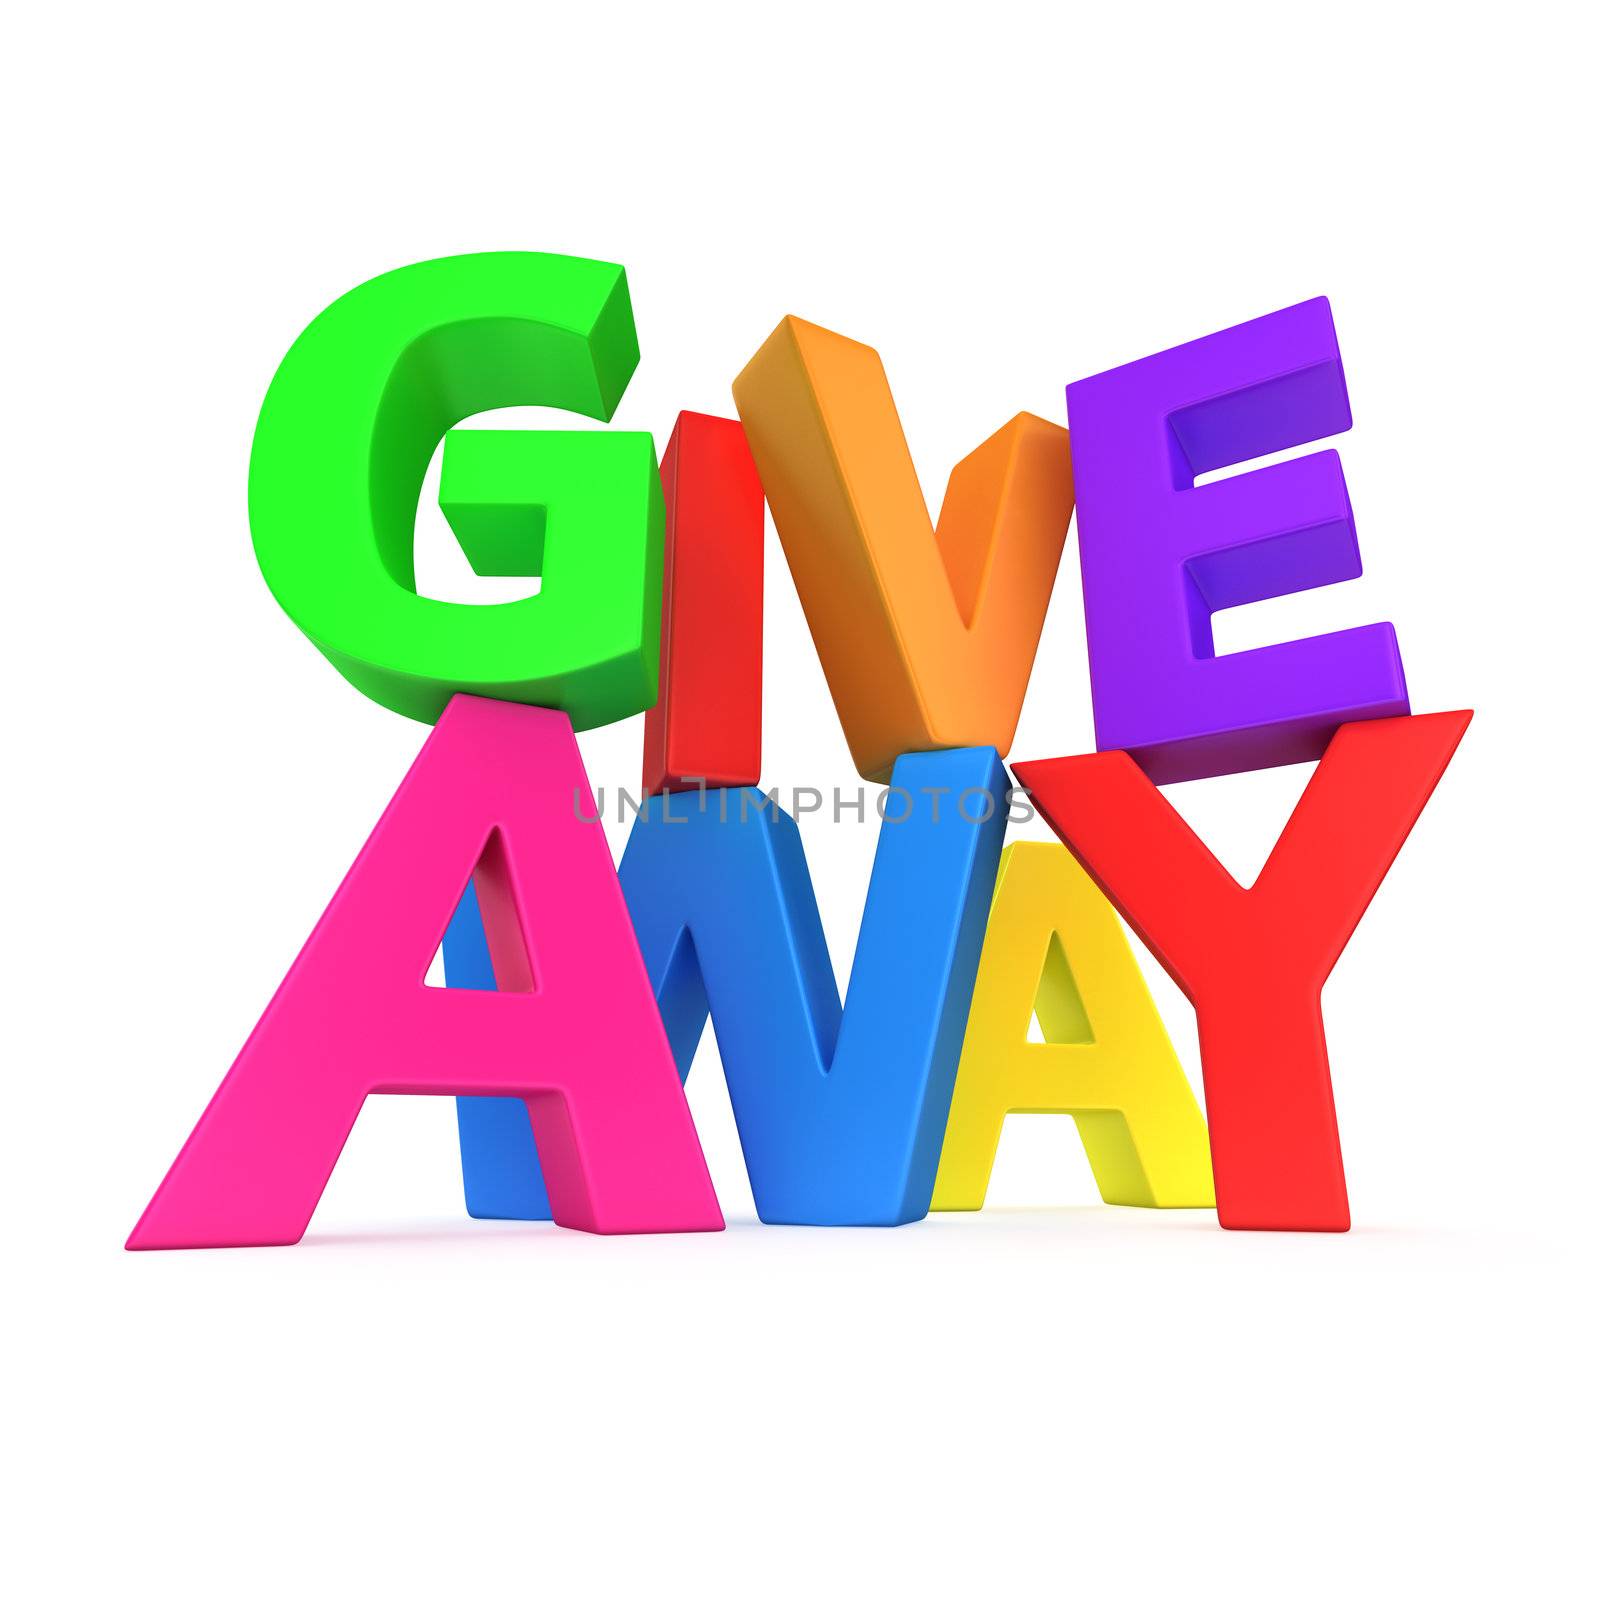 Text "Giveaway" made from multicolored letters